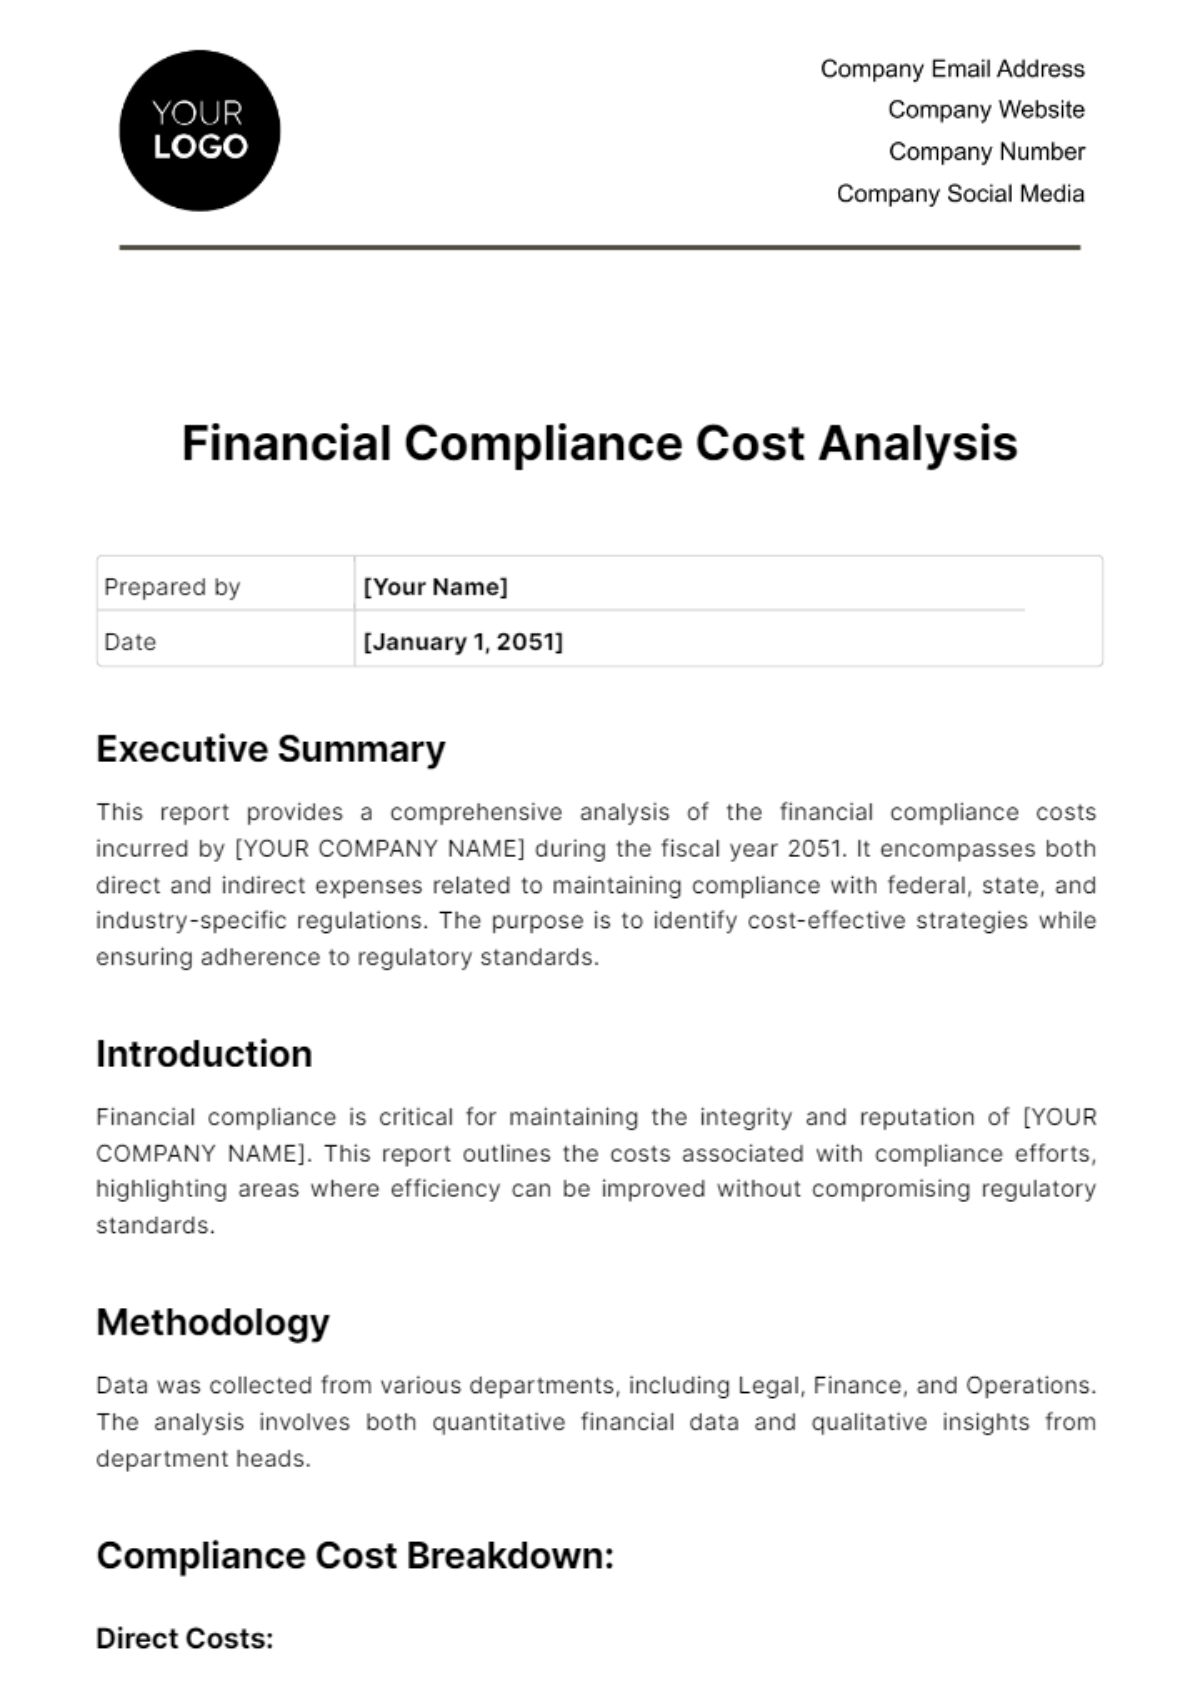 Financial Compliance Cost Analysis Template